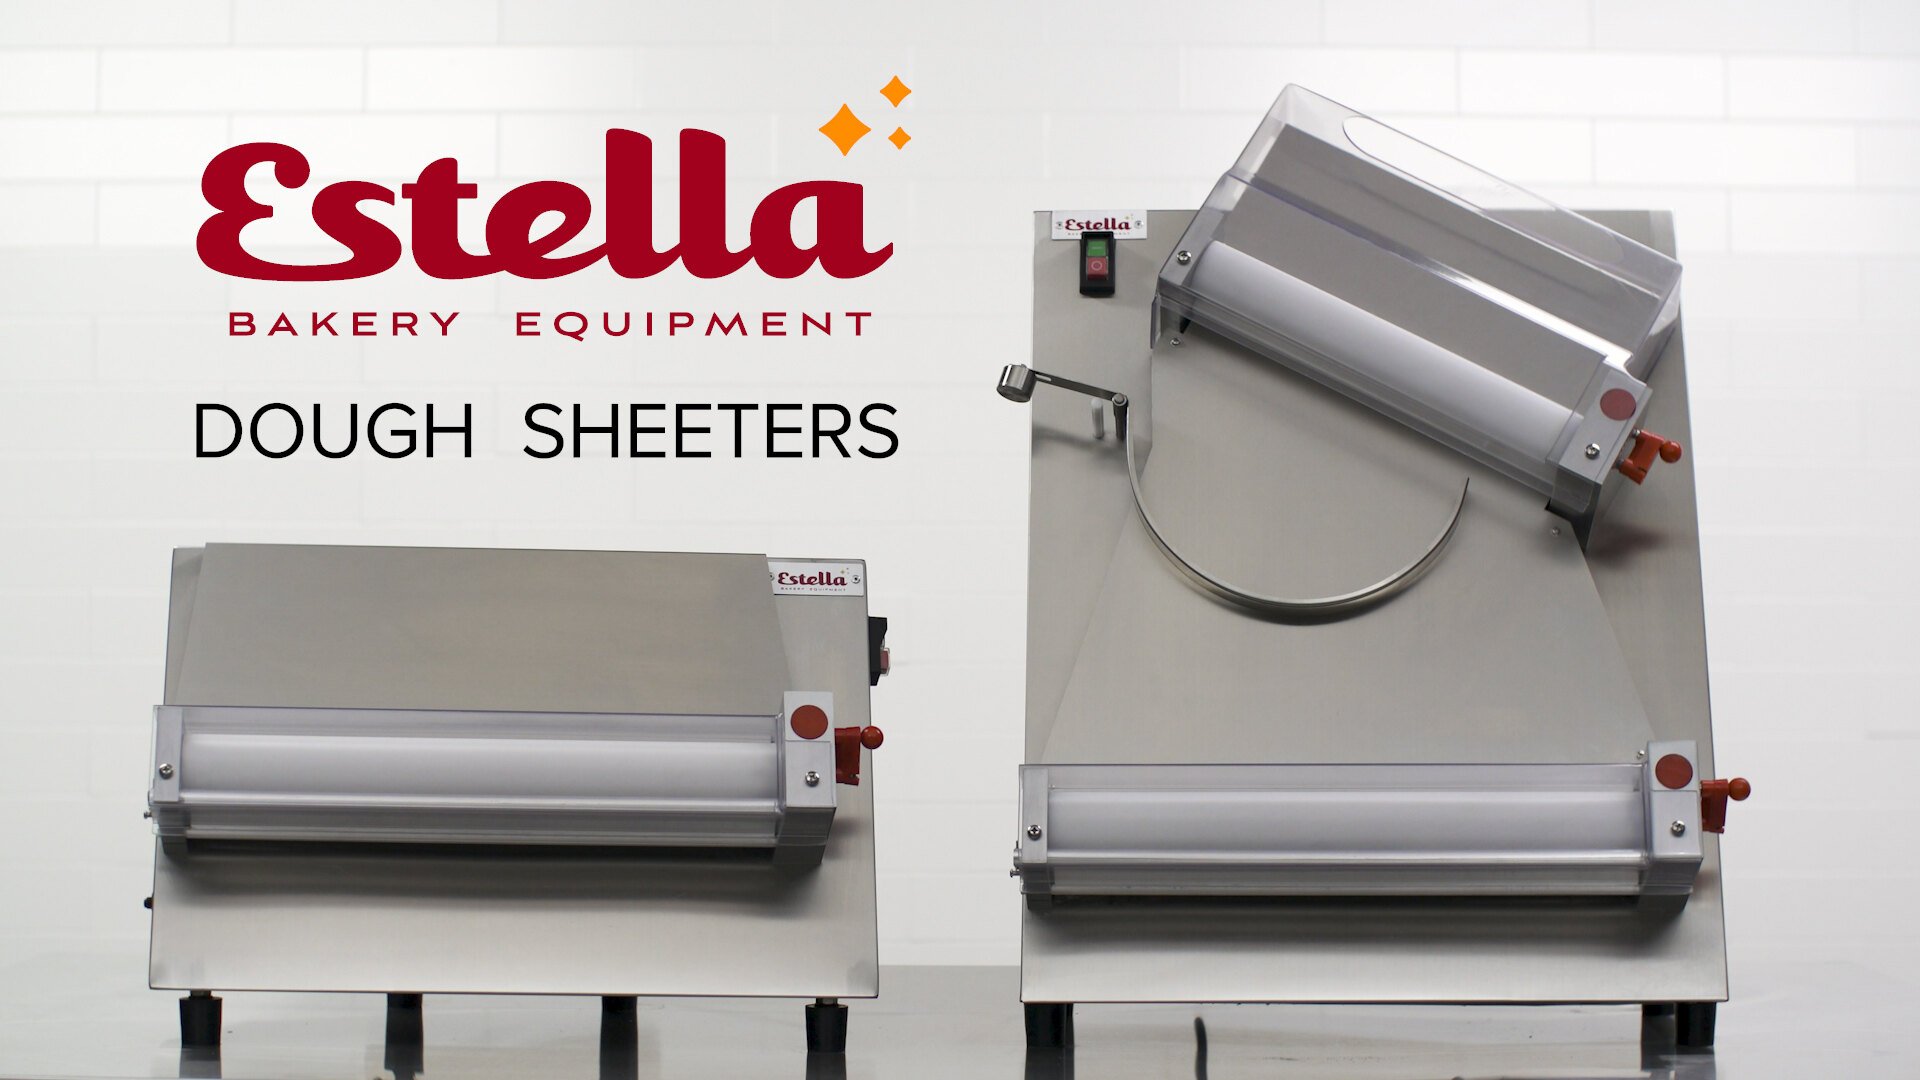 Estella EDS12D 12 Countertop Two Stage Dough Sheeter - 120V, 1/2 HP